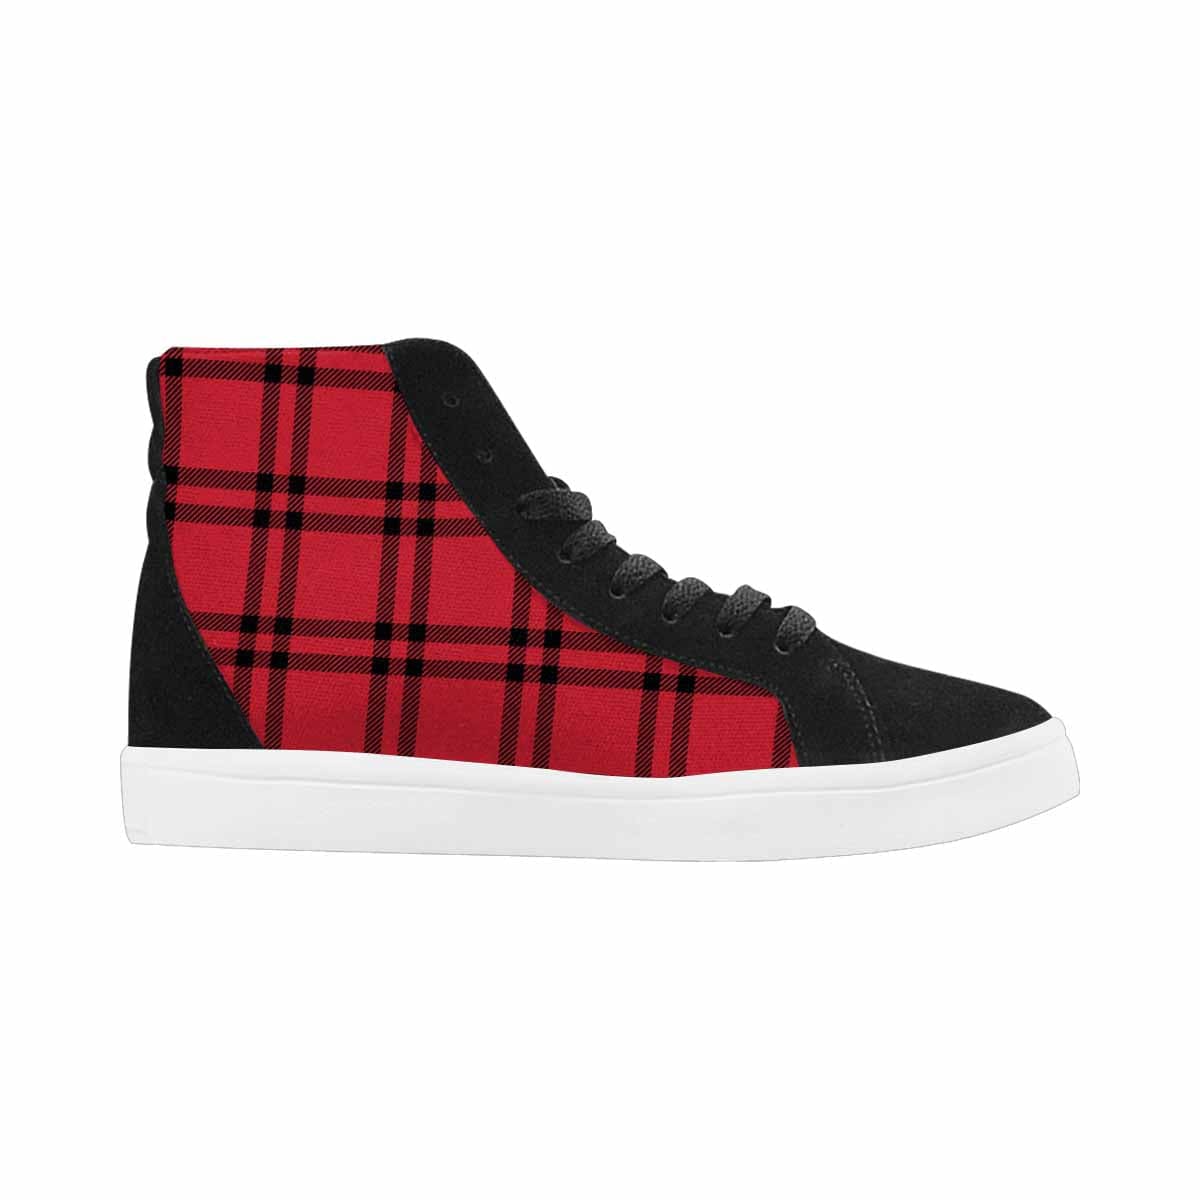 Uniquely You Sneakers for Women, Buffalo Plaid Red and Black - High Top Sports Shoes - Scarvesnthangs